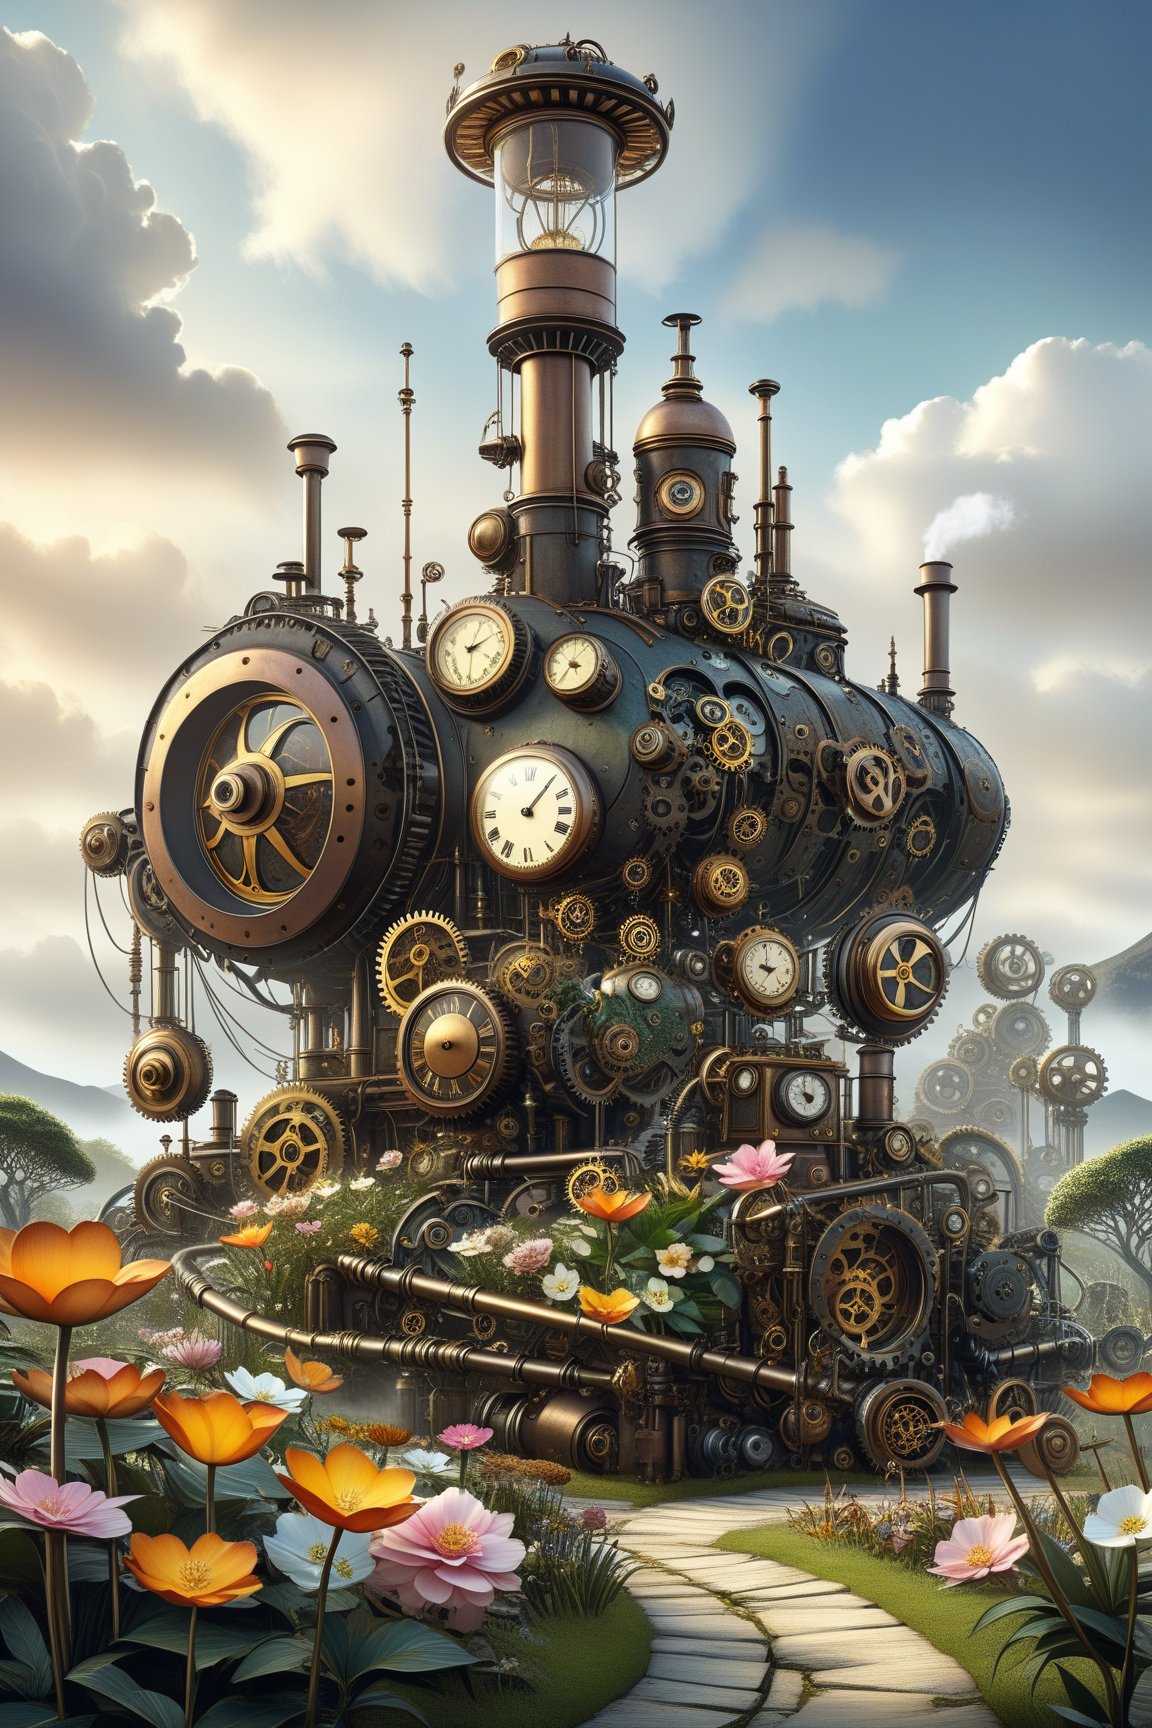 create a beautiful magical steampunk fantasy scene where you can evidence, A mechanical steam landscape enveloping a tranquil garden where exotic flowers bloom.Mechanical,DonMSt34mPXL